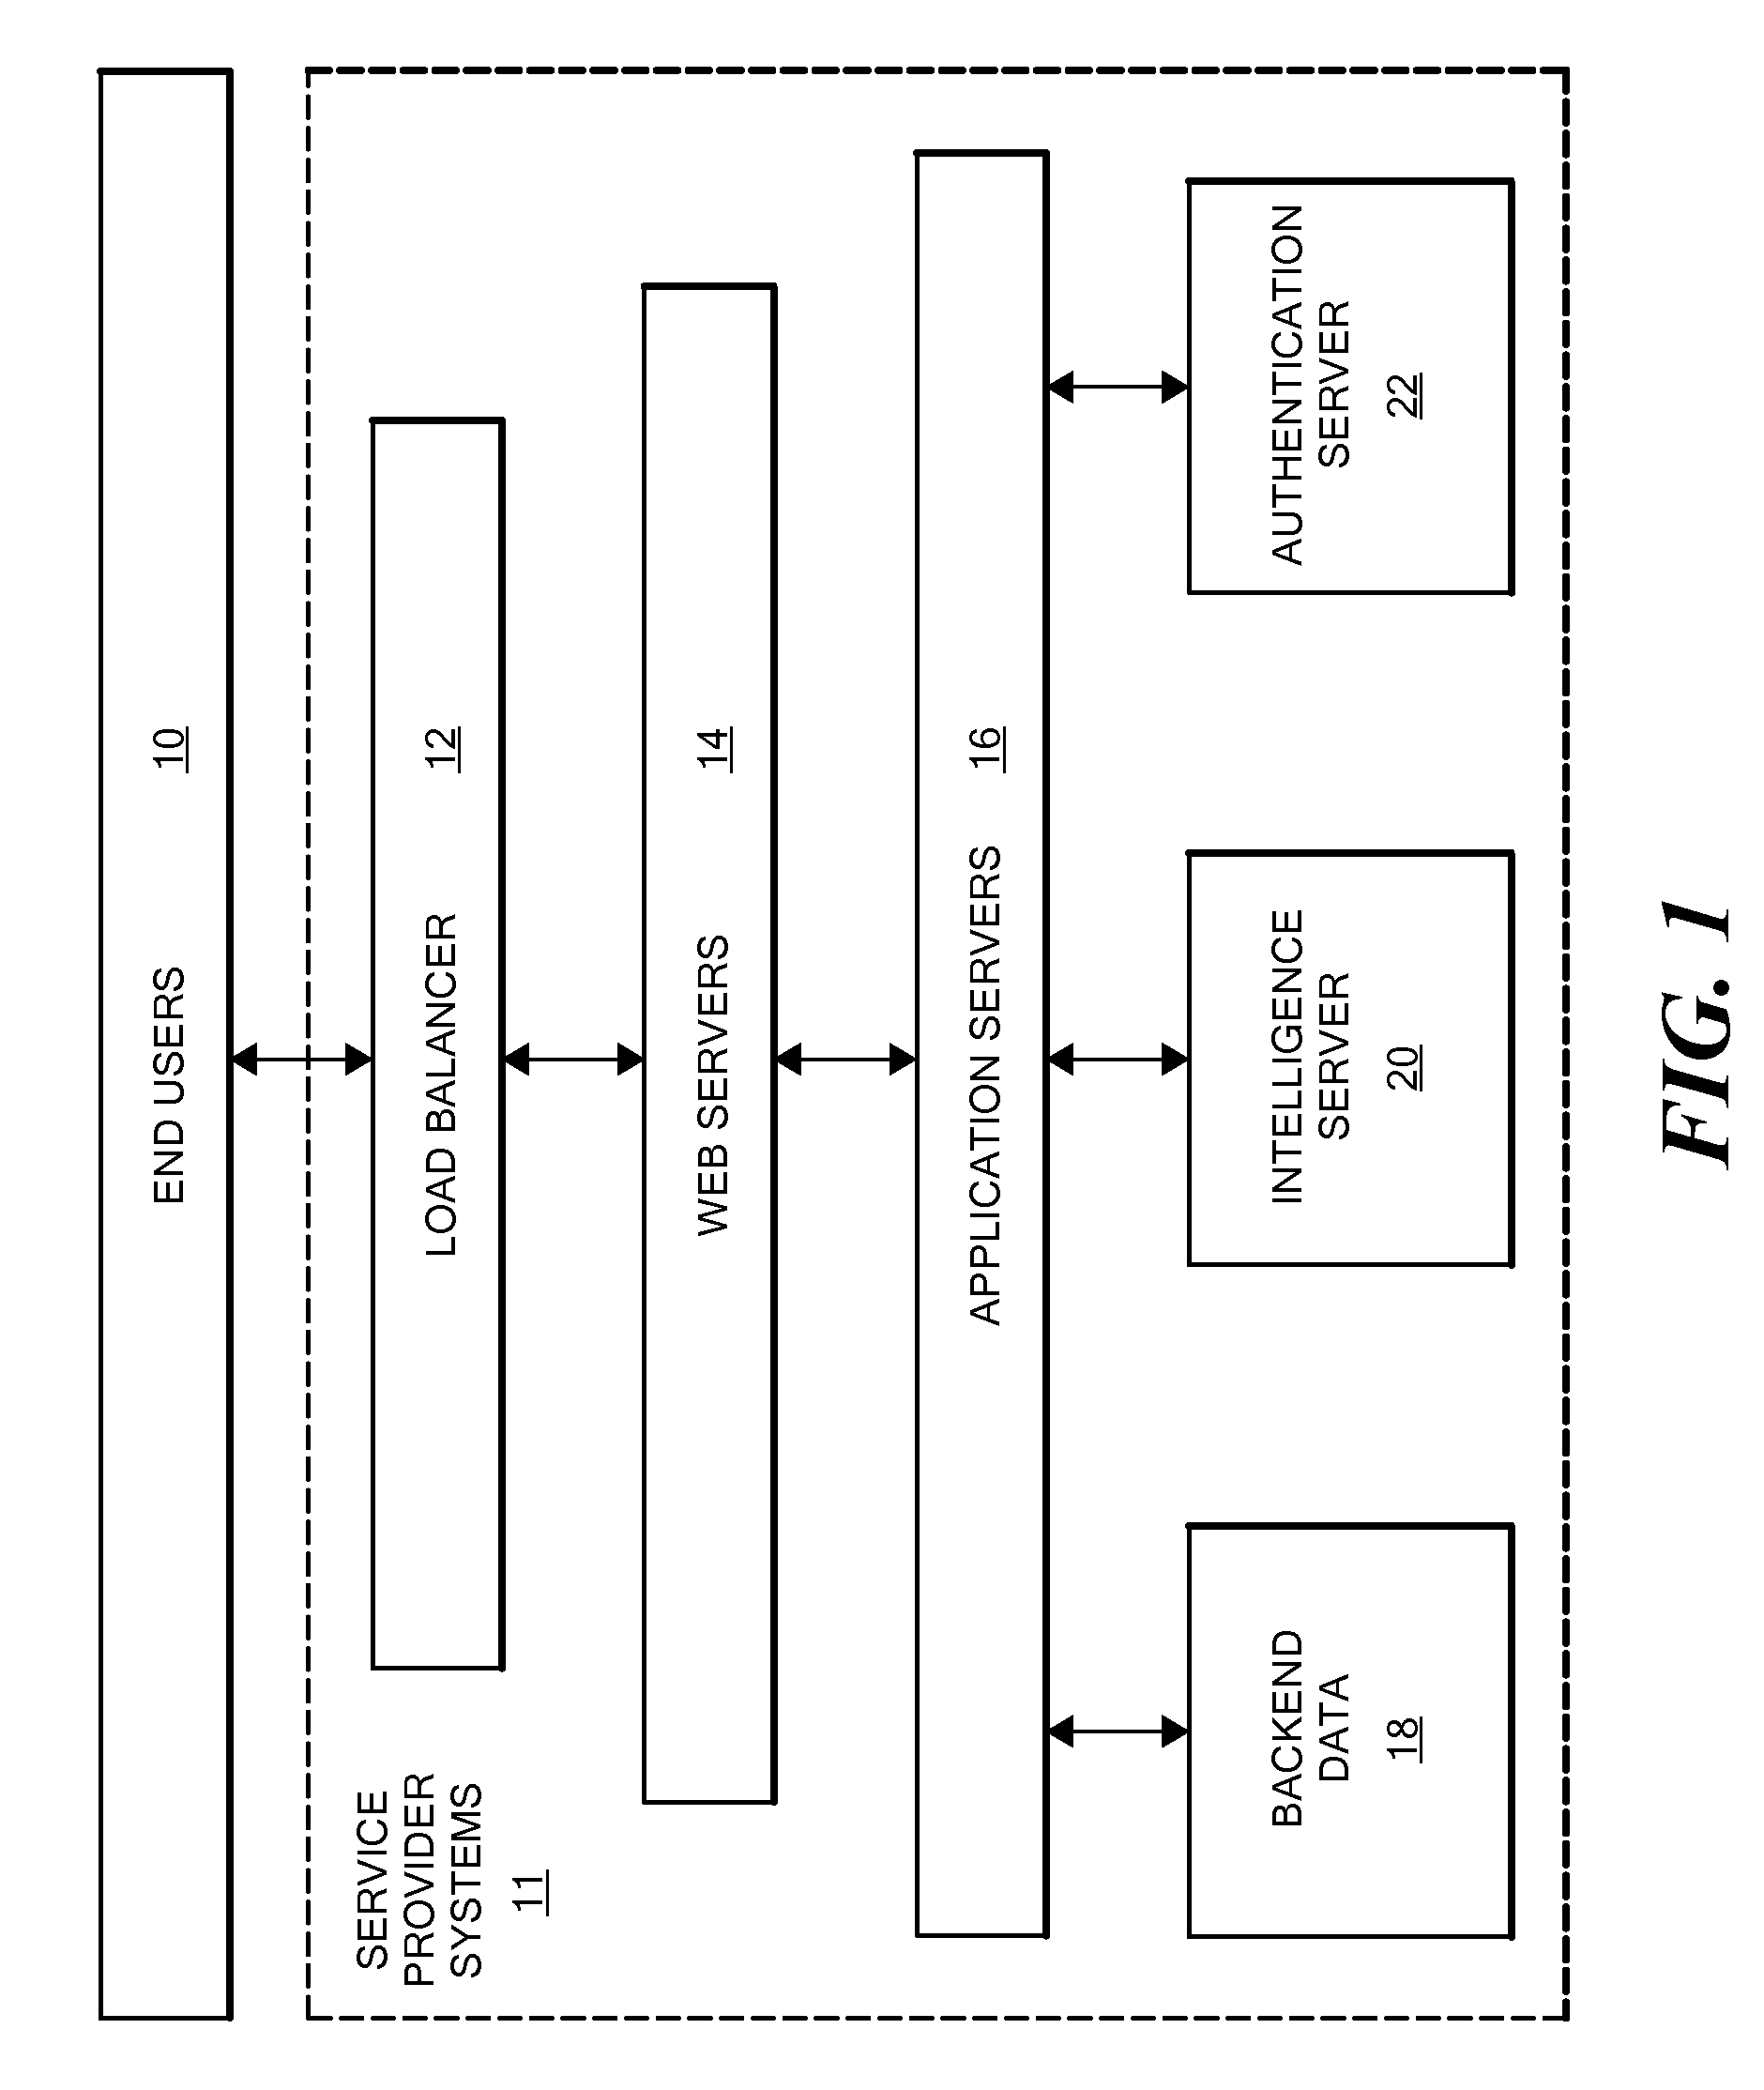 Method and system for dynamically changing user session behavior based on user and/or group classification in response to application server demand